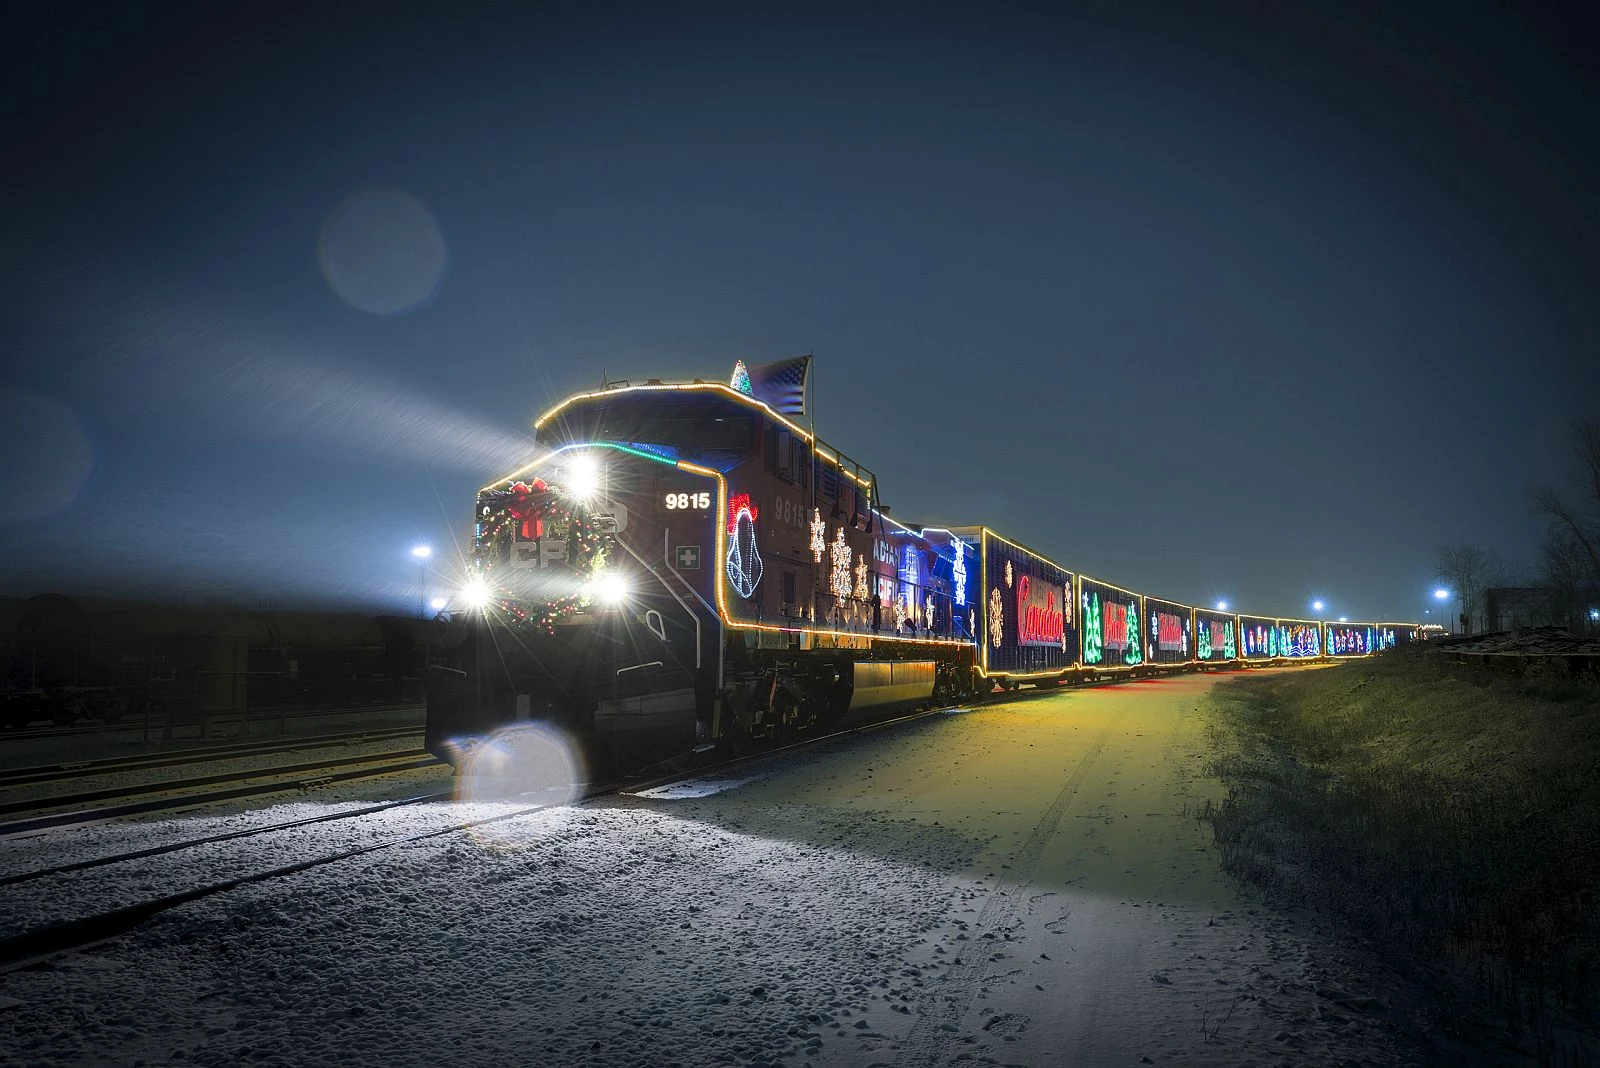 Lighted Train Set To Spread Holiday Cheer In Central Minnesota [AUDIO]